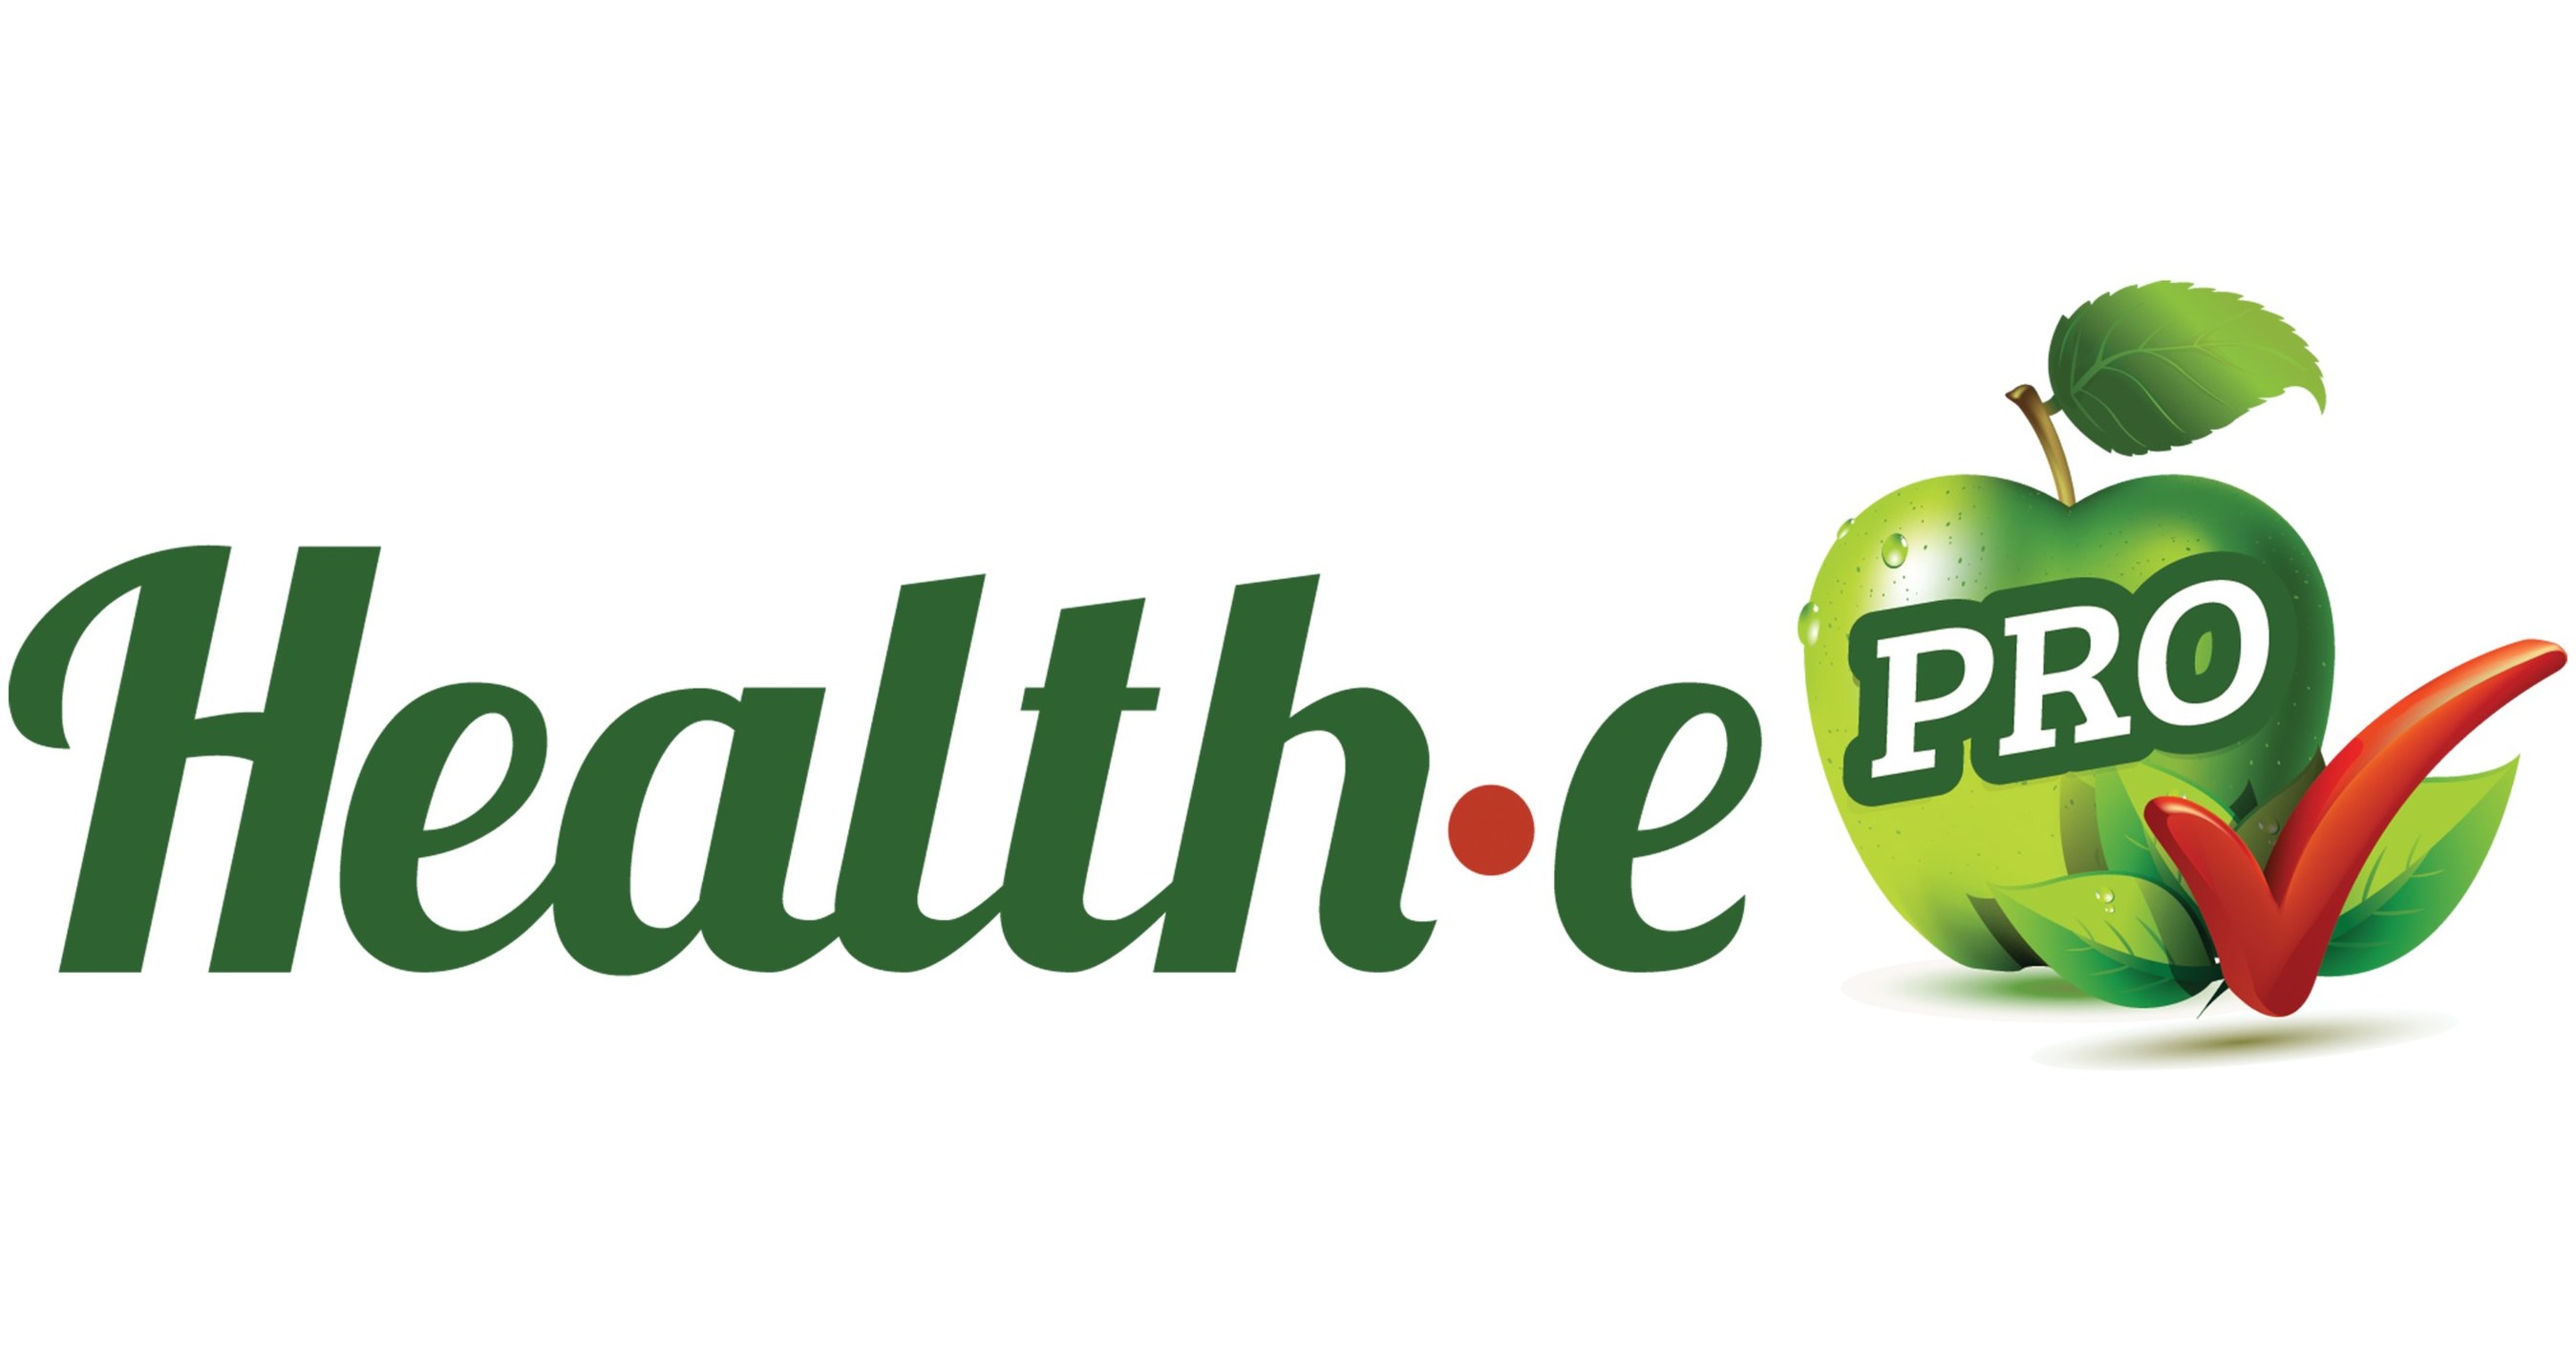 South Carolina Department of Education selects Health-e Pro for menu planning and nutrient analysis software